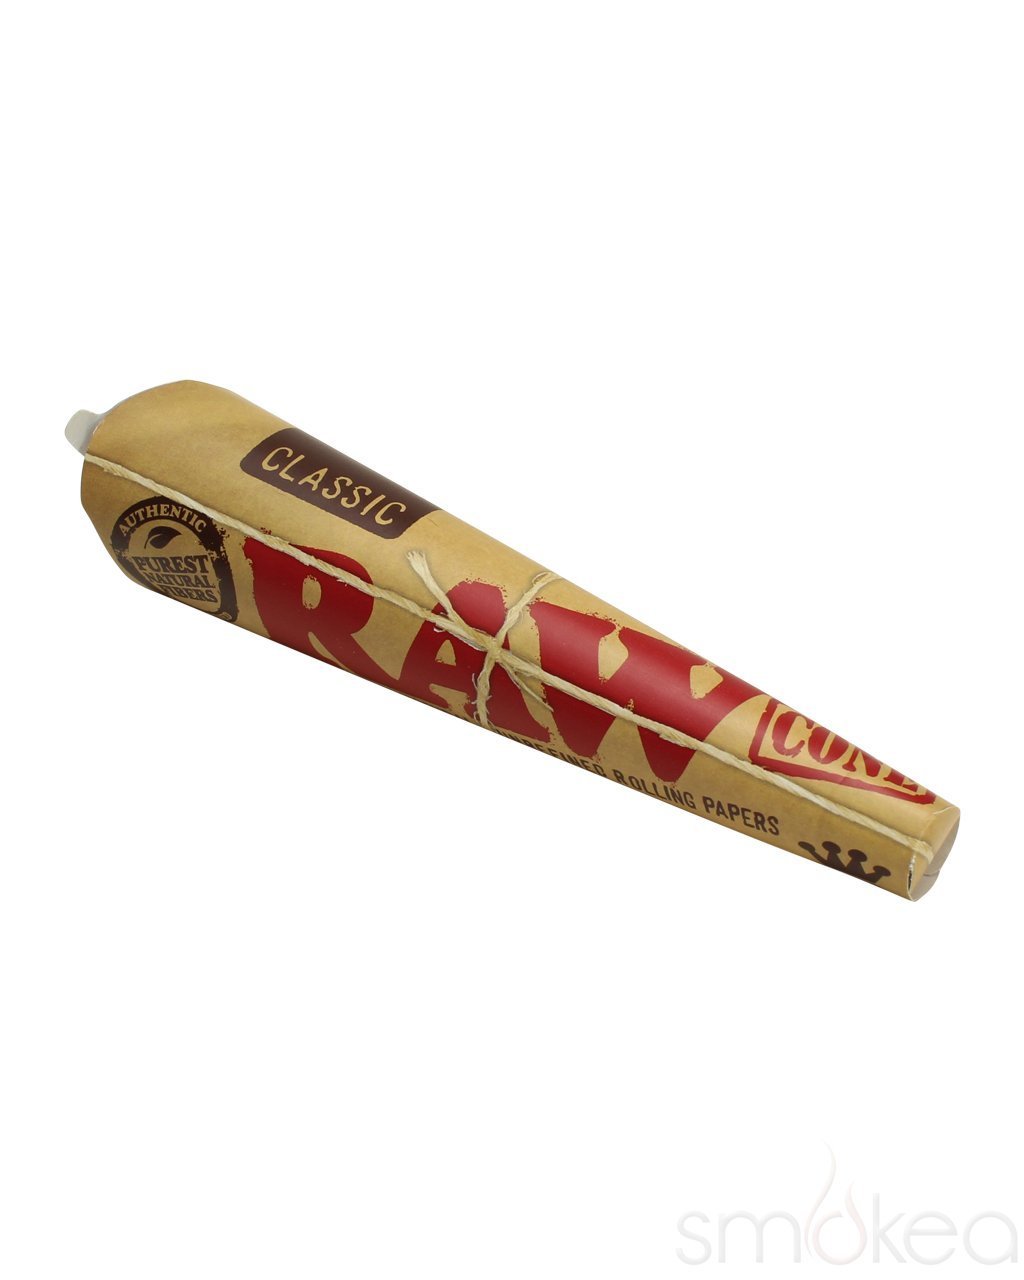 Raw Classic King Size Pre-Rolled Cones (1-Pack) - Bittchaser Smoke Shop